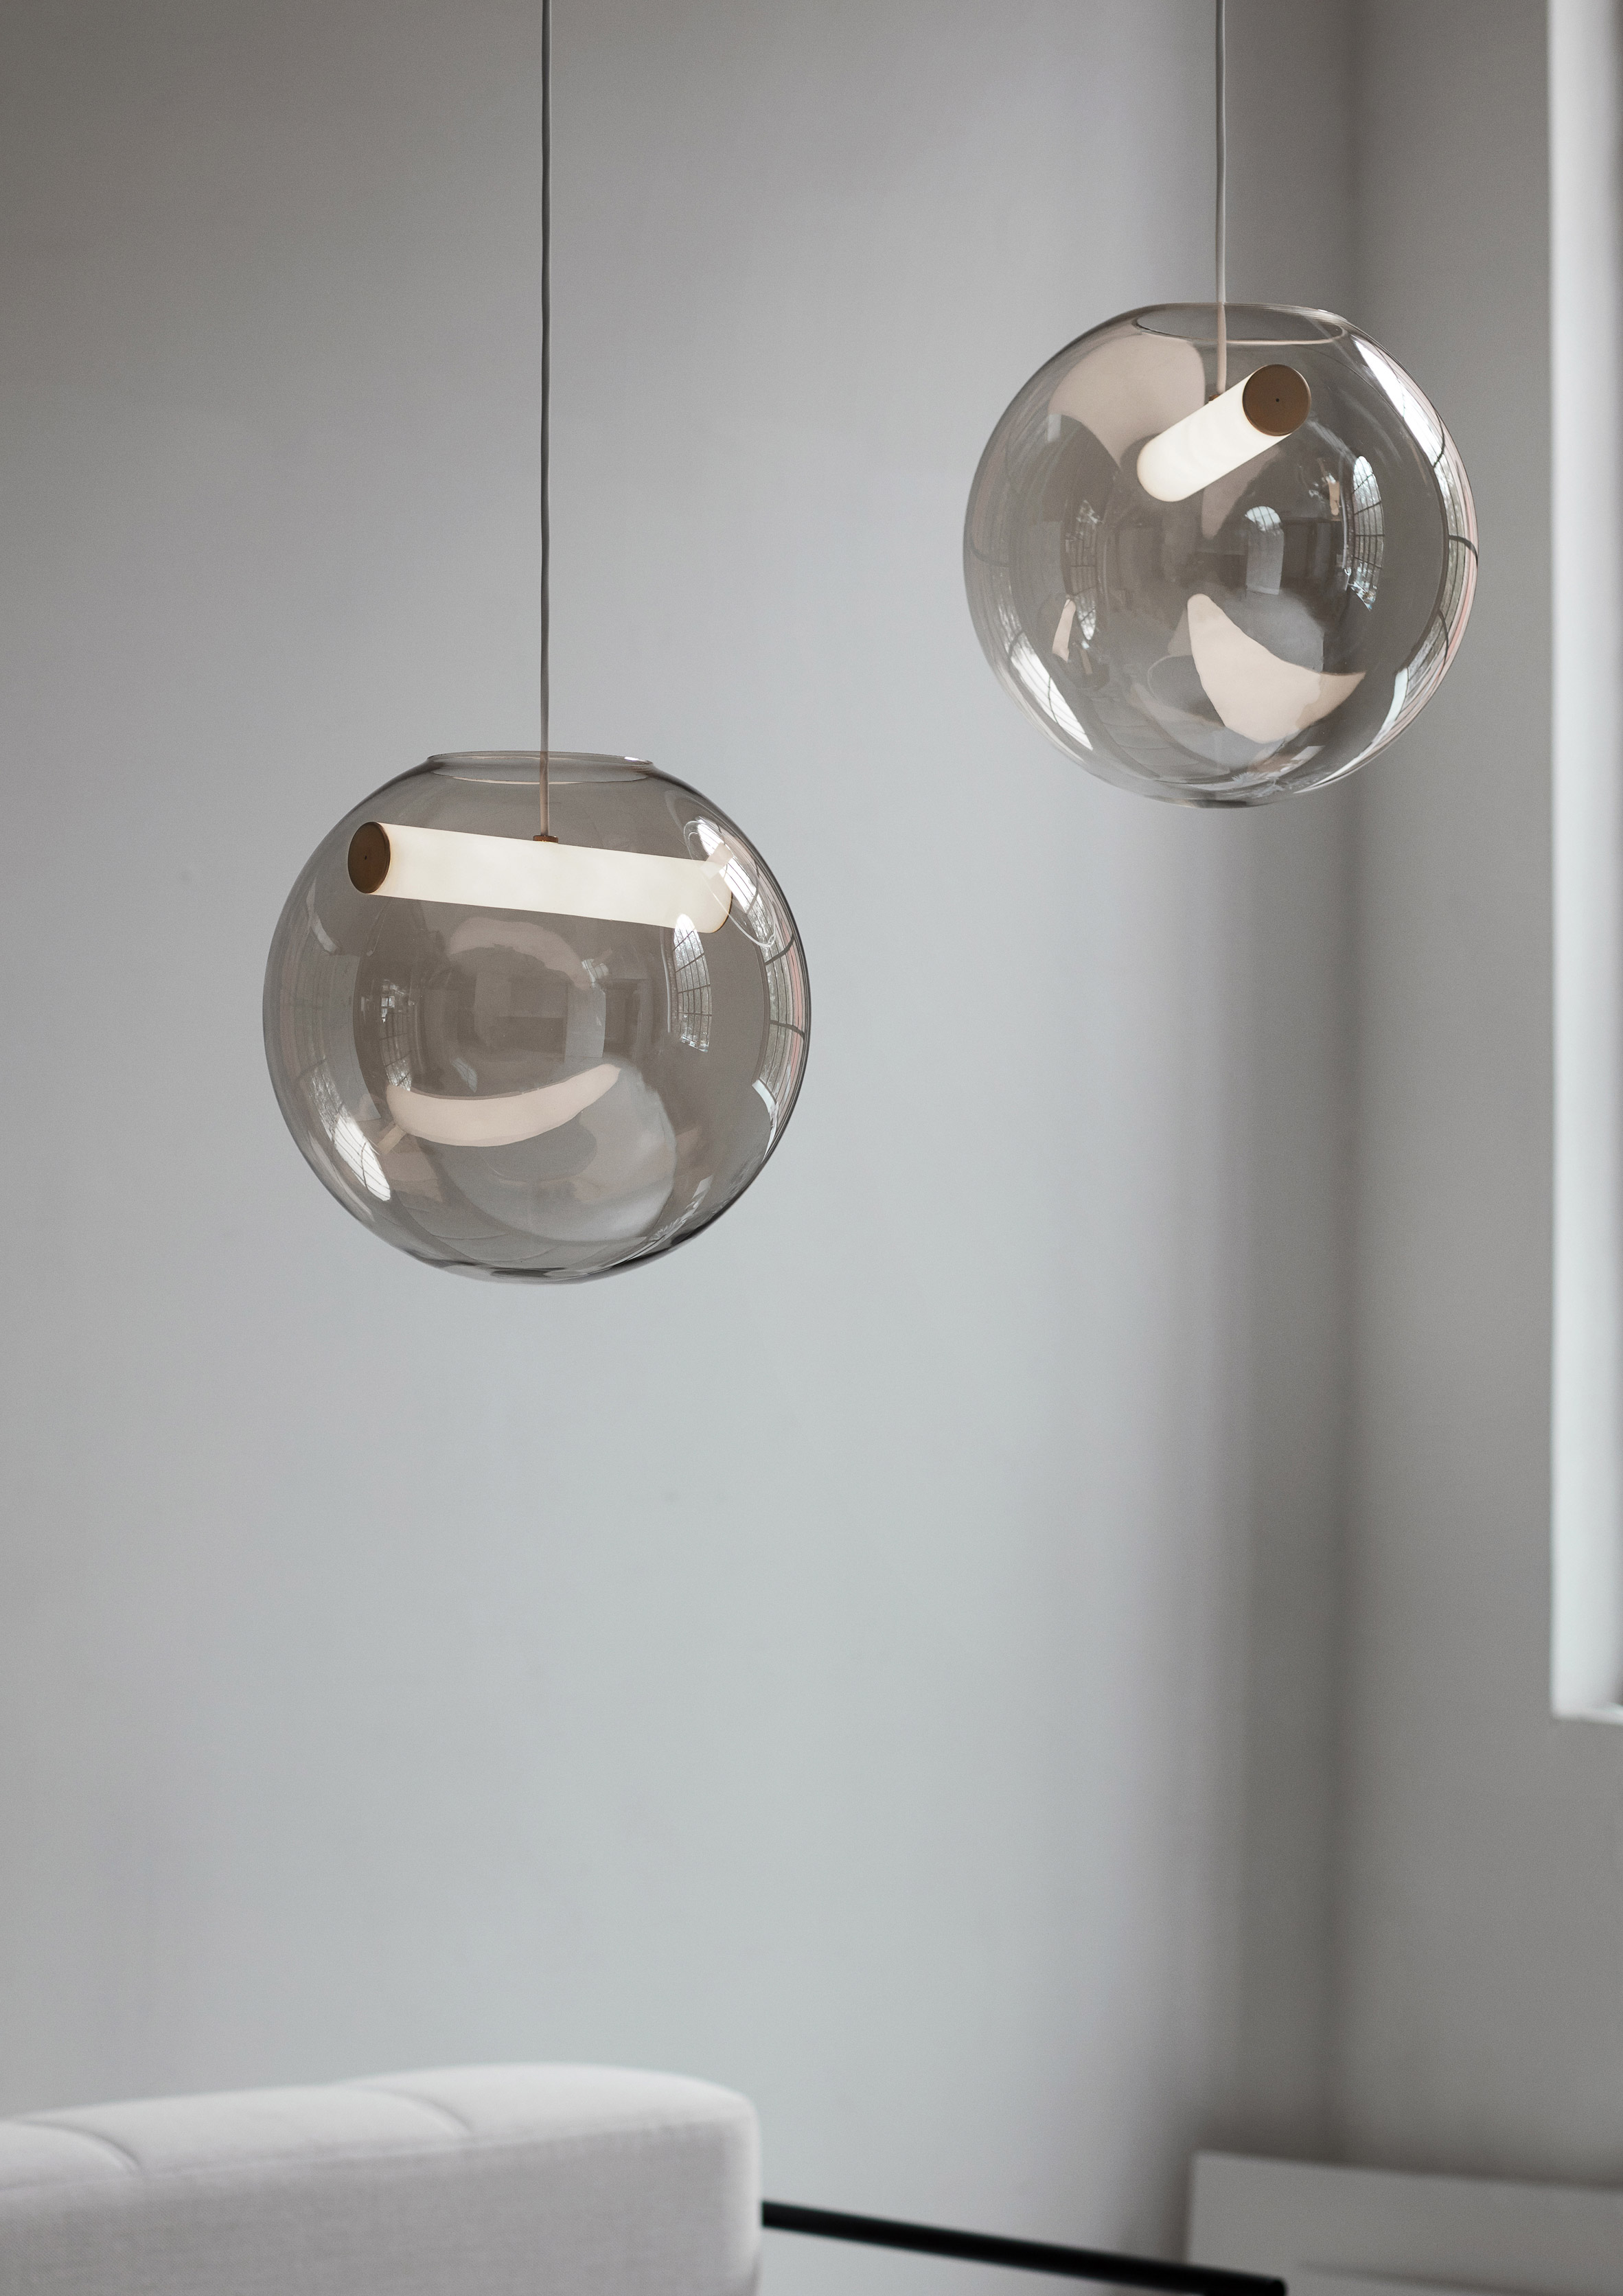 The Reveal pendant lamp by Silje Nesdal comprises a hollow sphere of glass, framing a horizontal light suspended on a copper-coated cord.